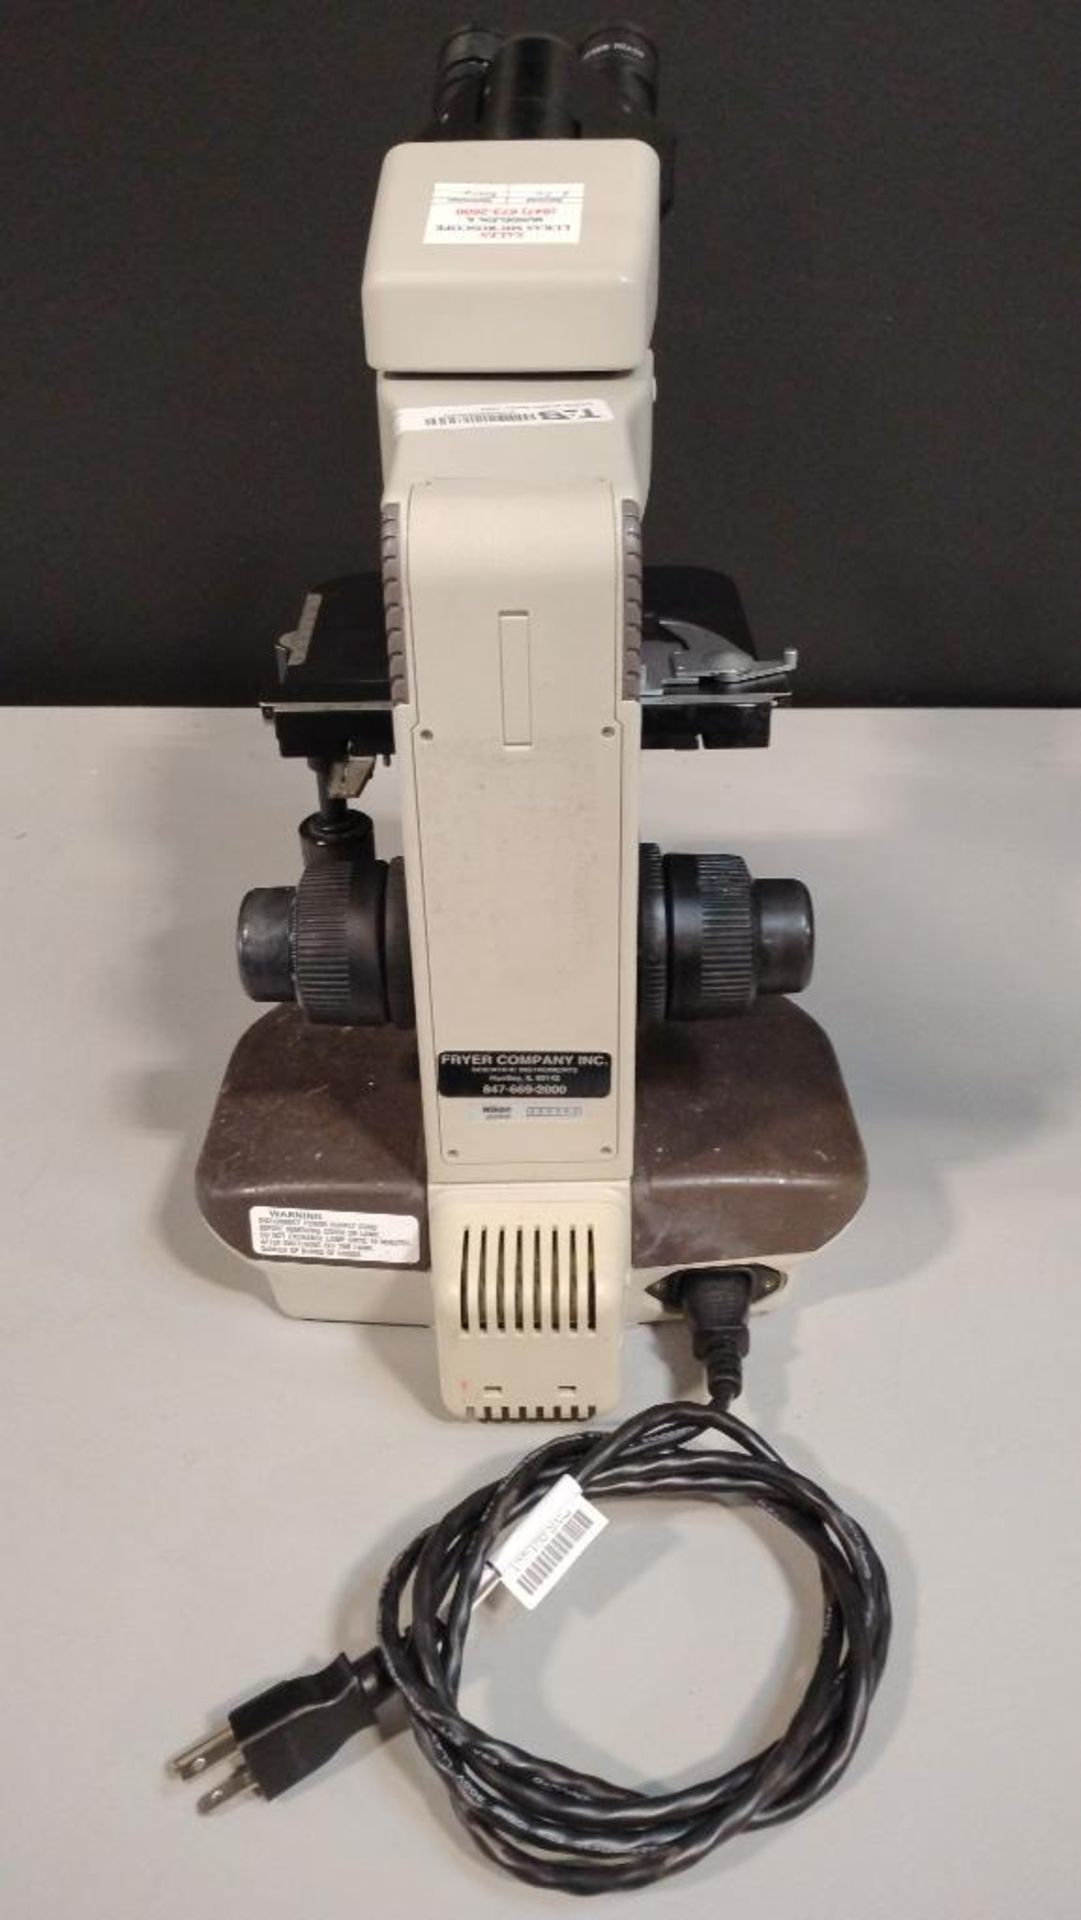 NIKON LABOPHOT-2 LAB MICROSCOPE WITH 5 OBJECTIVES - Image 4 of 4